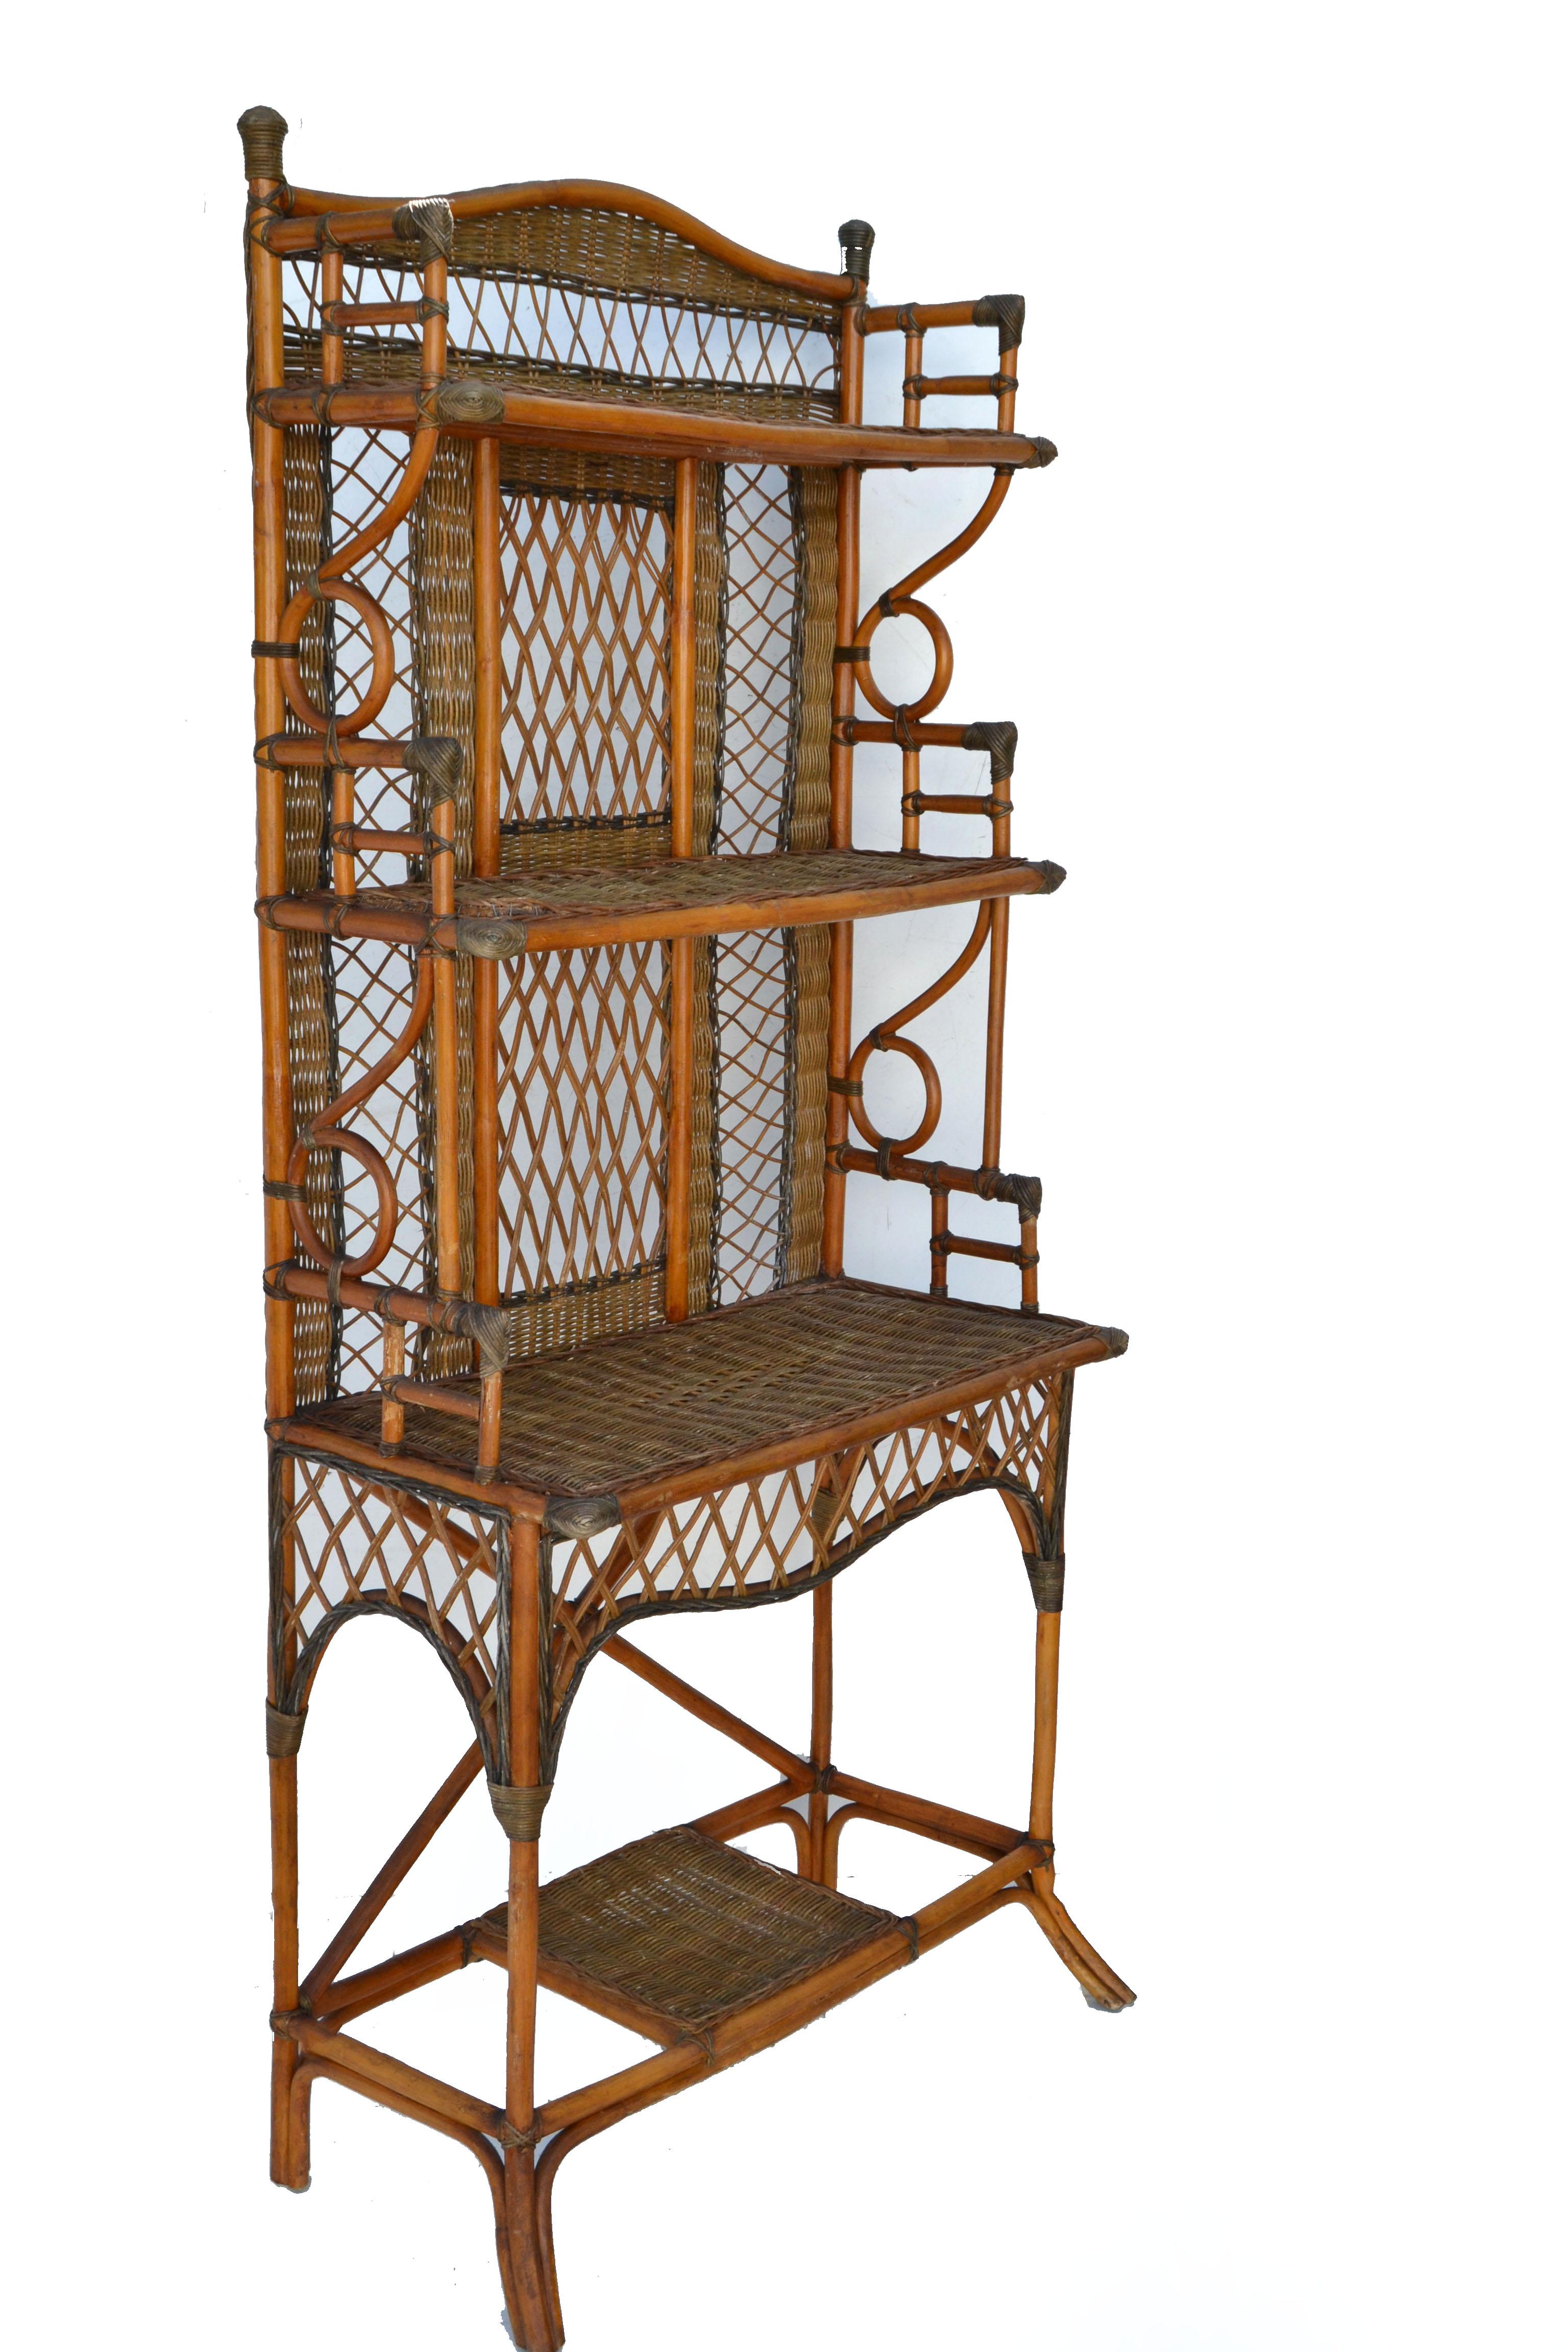 American Mid-Century Modern handcrafted 5 tier etagere, bookcase or cupboard made out of Bentwood Bamboo, Reed and hand woven cane shelves.
All original 1950s condition with some minor breaks, but firm and sturdy for your China, books or display